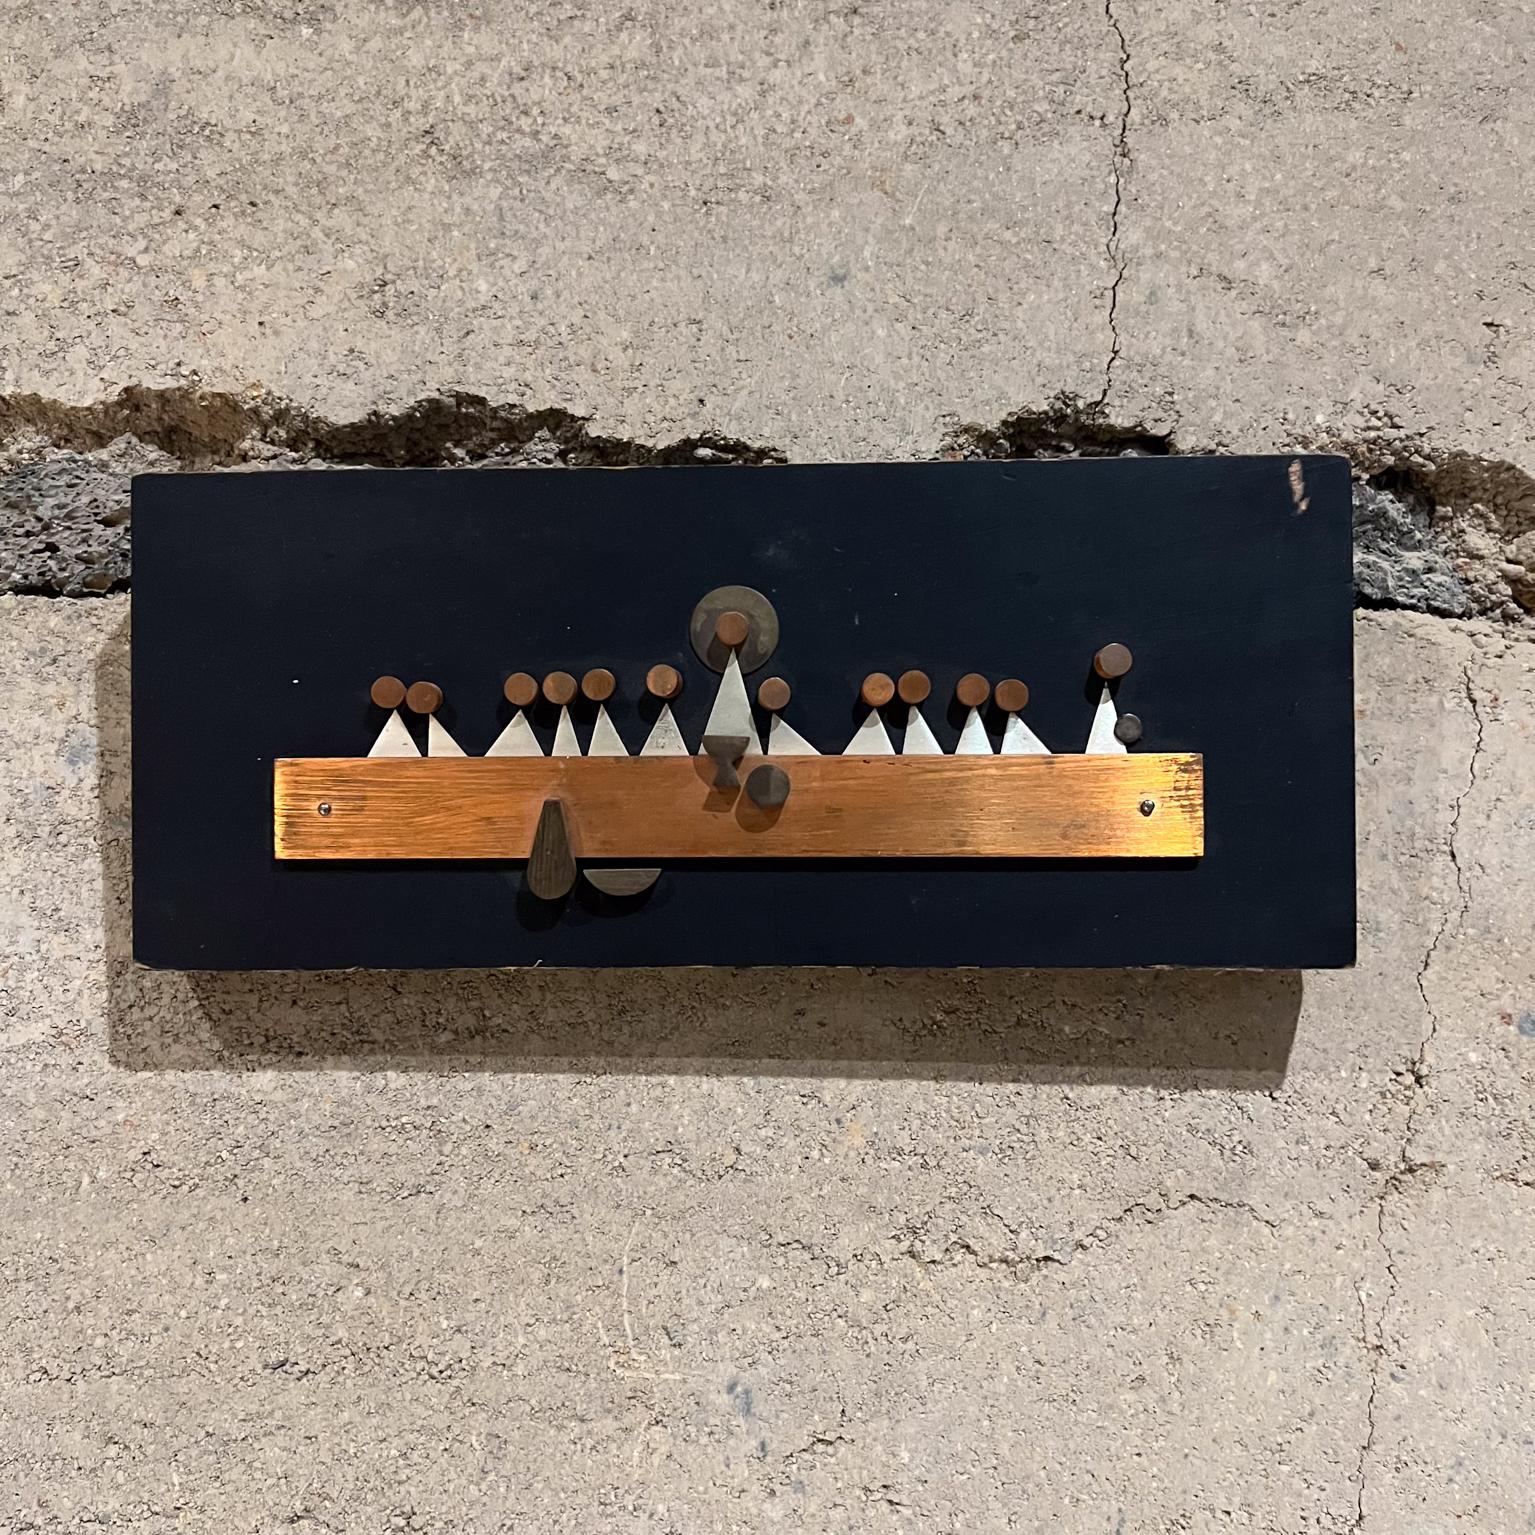 
1960s Last Supper Abstract Wall Sculpture Modernist Plaque
by Emaus Benedictine Monks of Cuernavaca, Mexico
Maker stamp
Solid Wood Mixed Metals
5 h x 12 w x 1 d
Original vintage unrestored preowned condition.
Please refer to images.